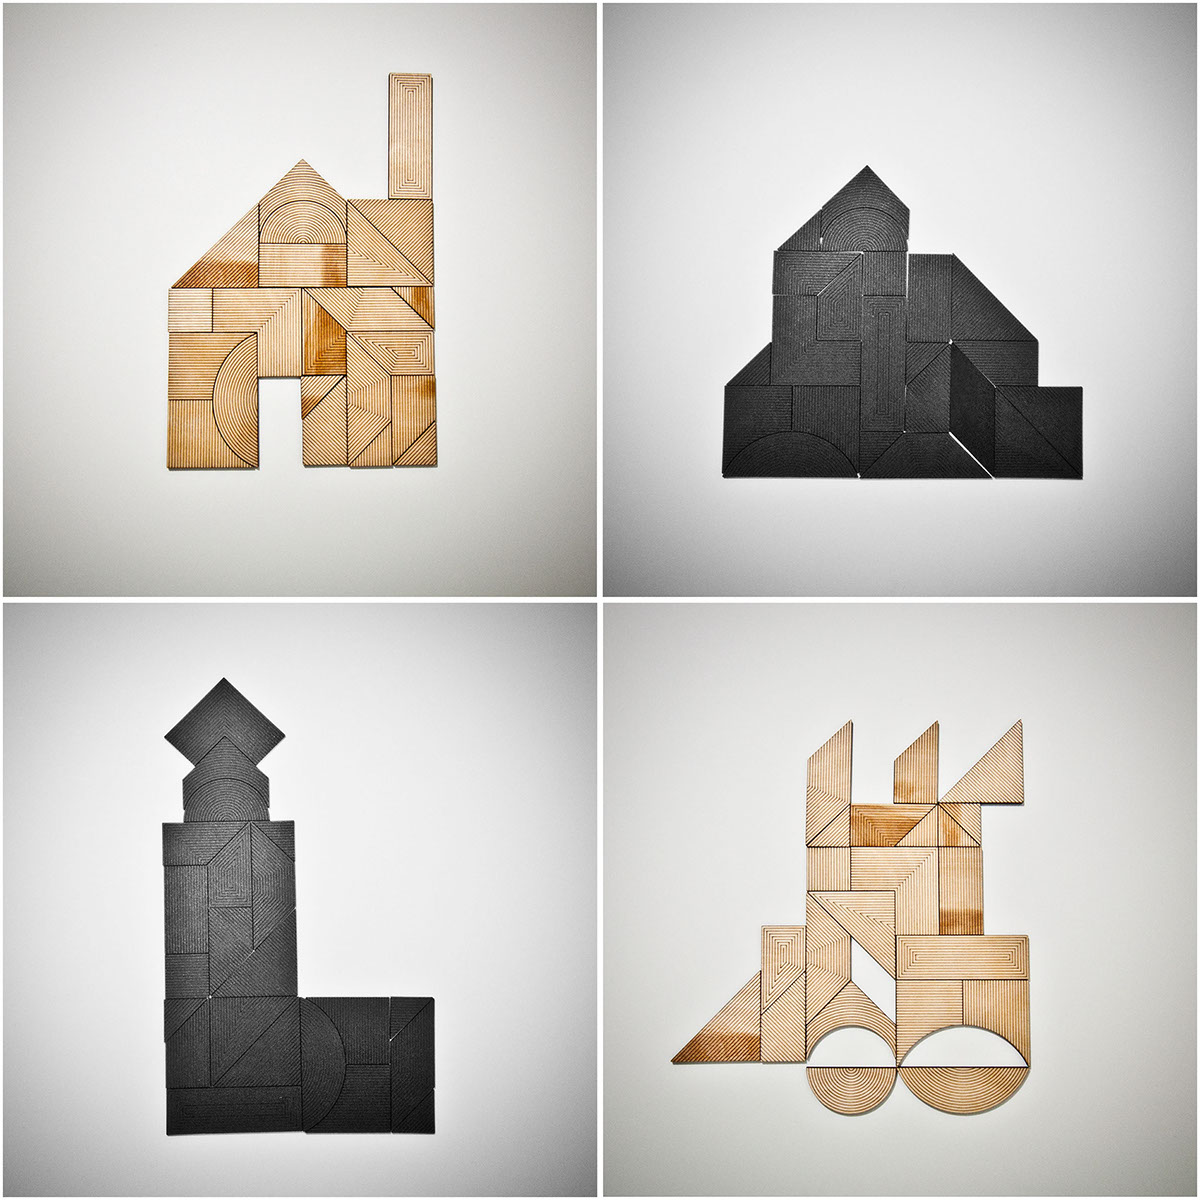 Oblika wooden toy puzzle architectural toy Jonathan Dorthe atelier-d